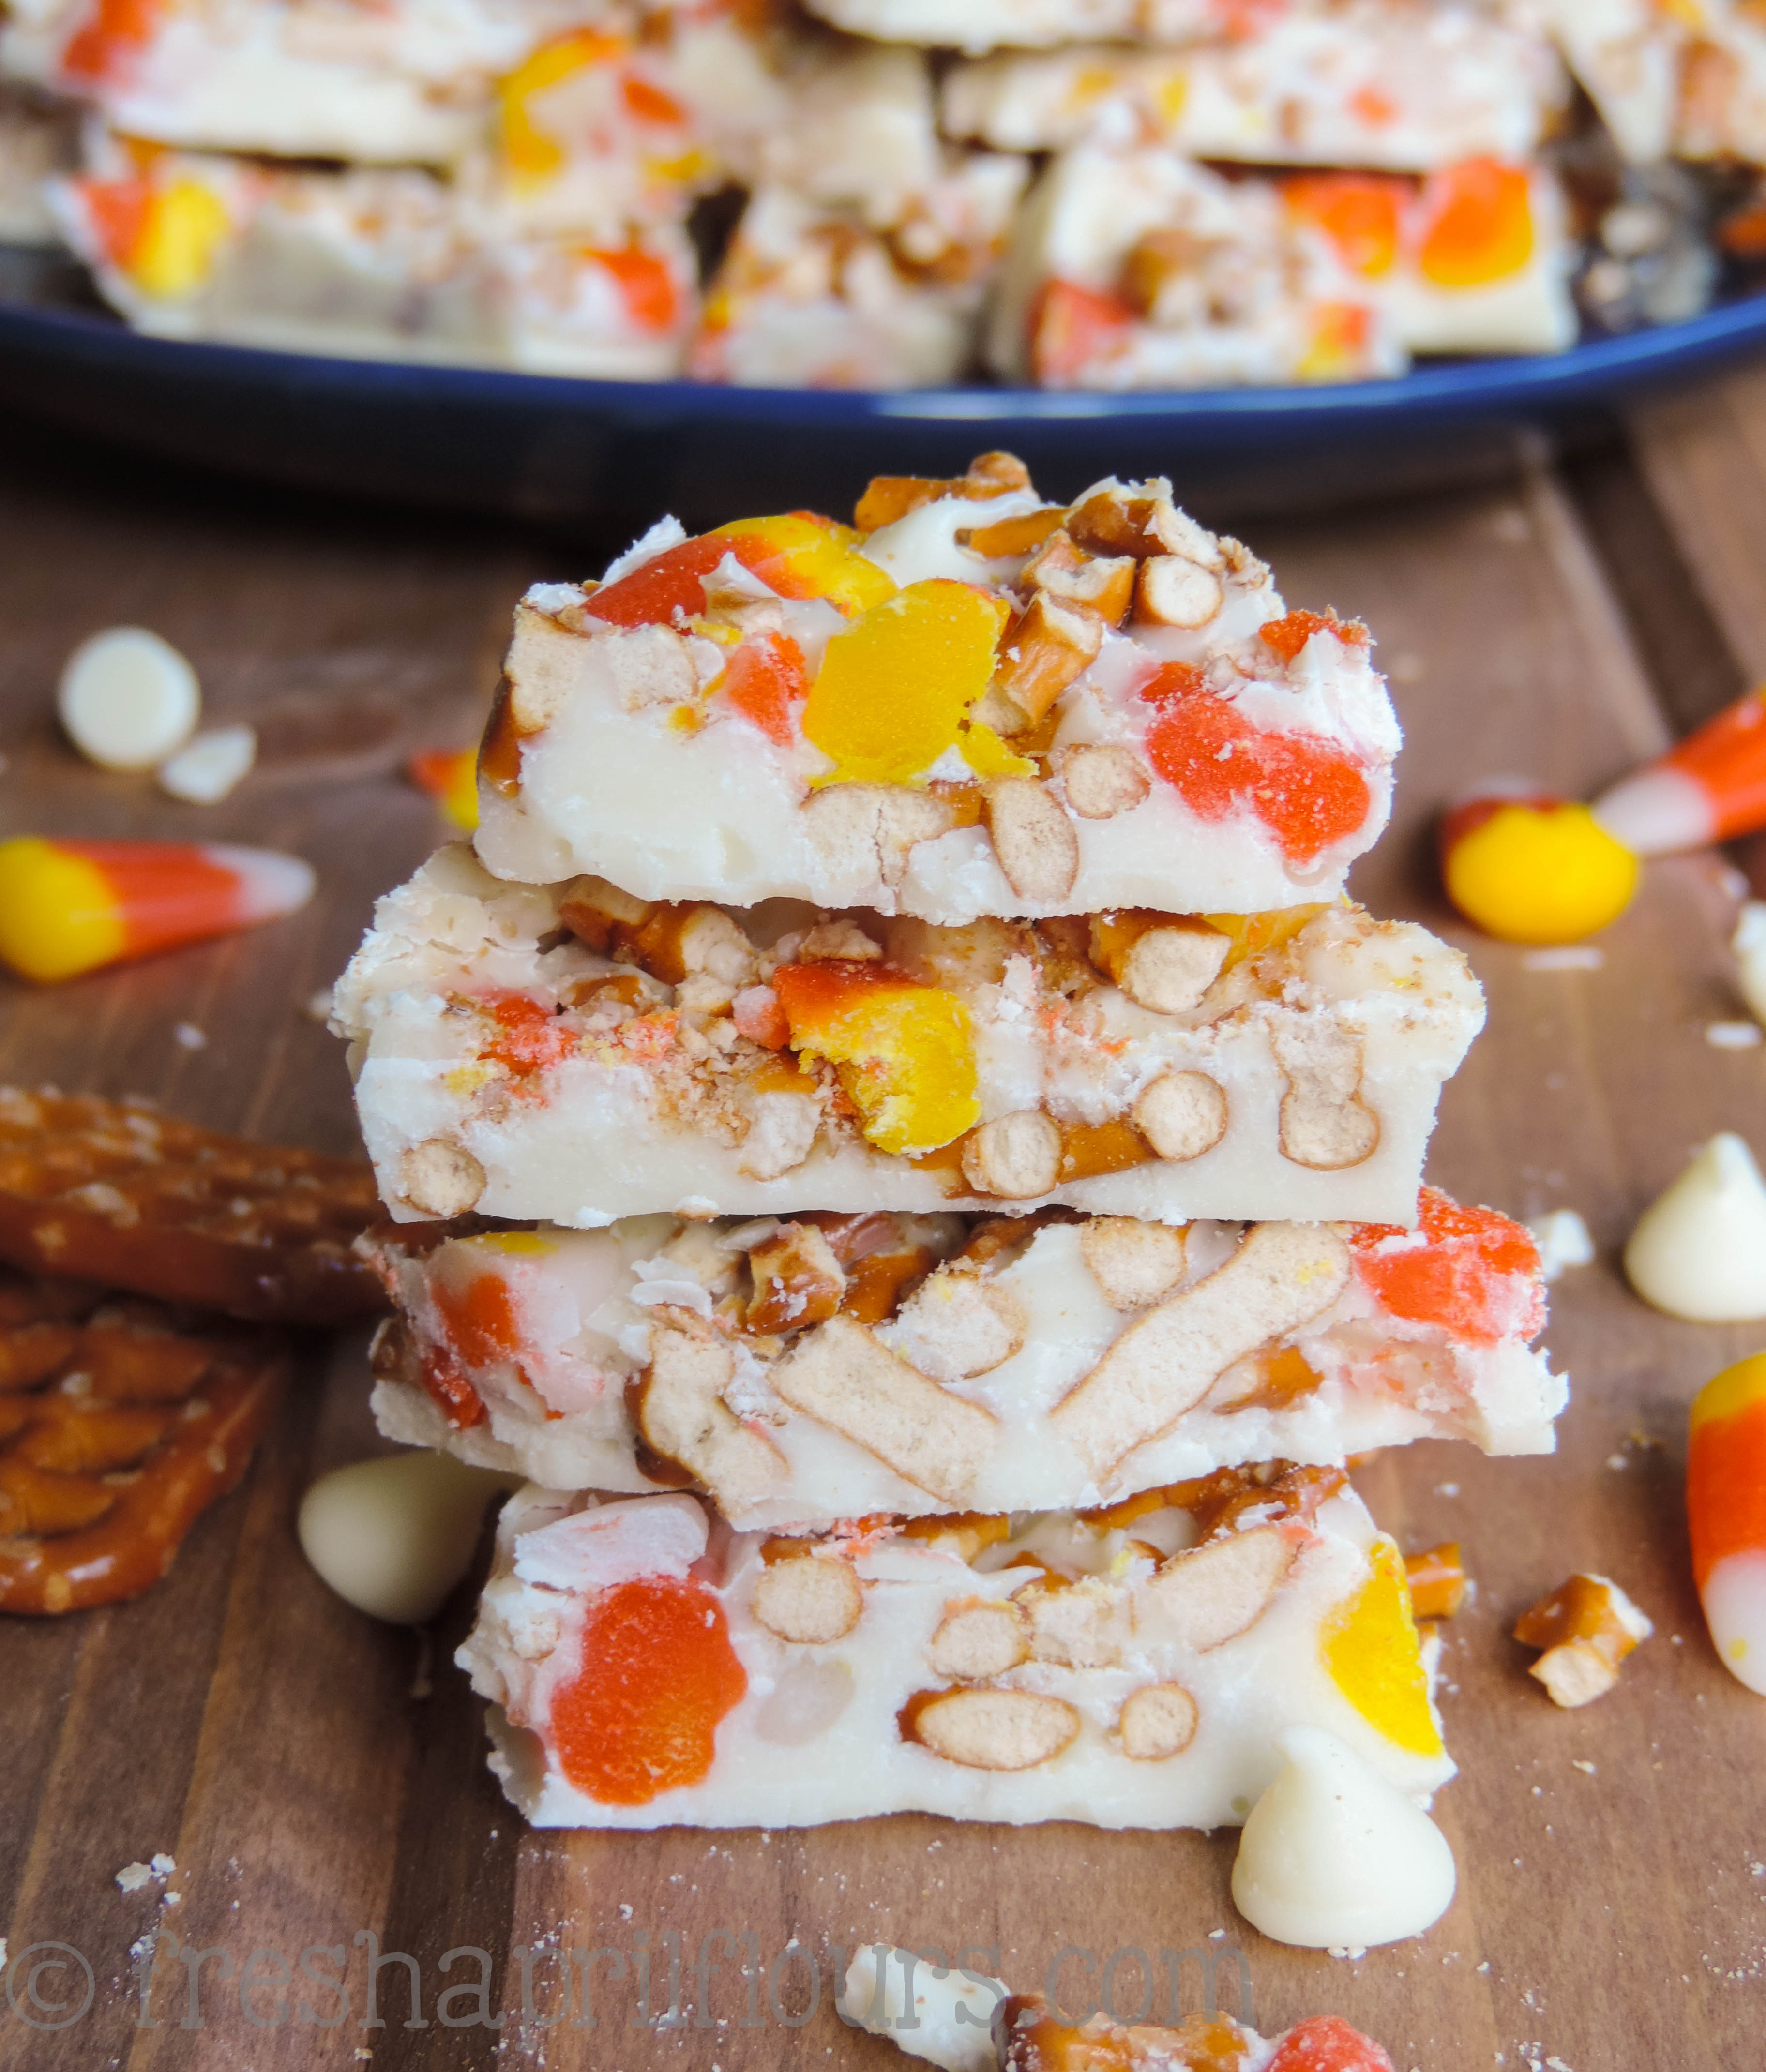 Candy Corn Pretzel Bark: This sweet, salty, chewy, and crunchy bark is a great way to use up some of your Halloween candy corn. via @frshaprilflours